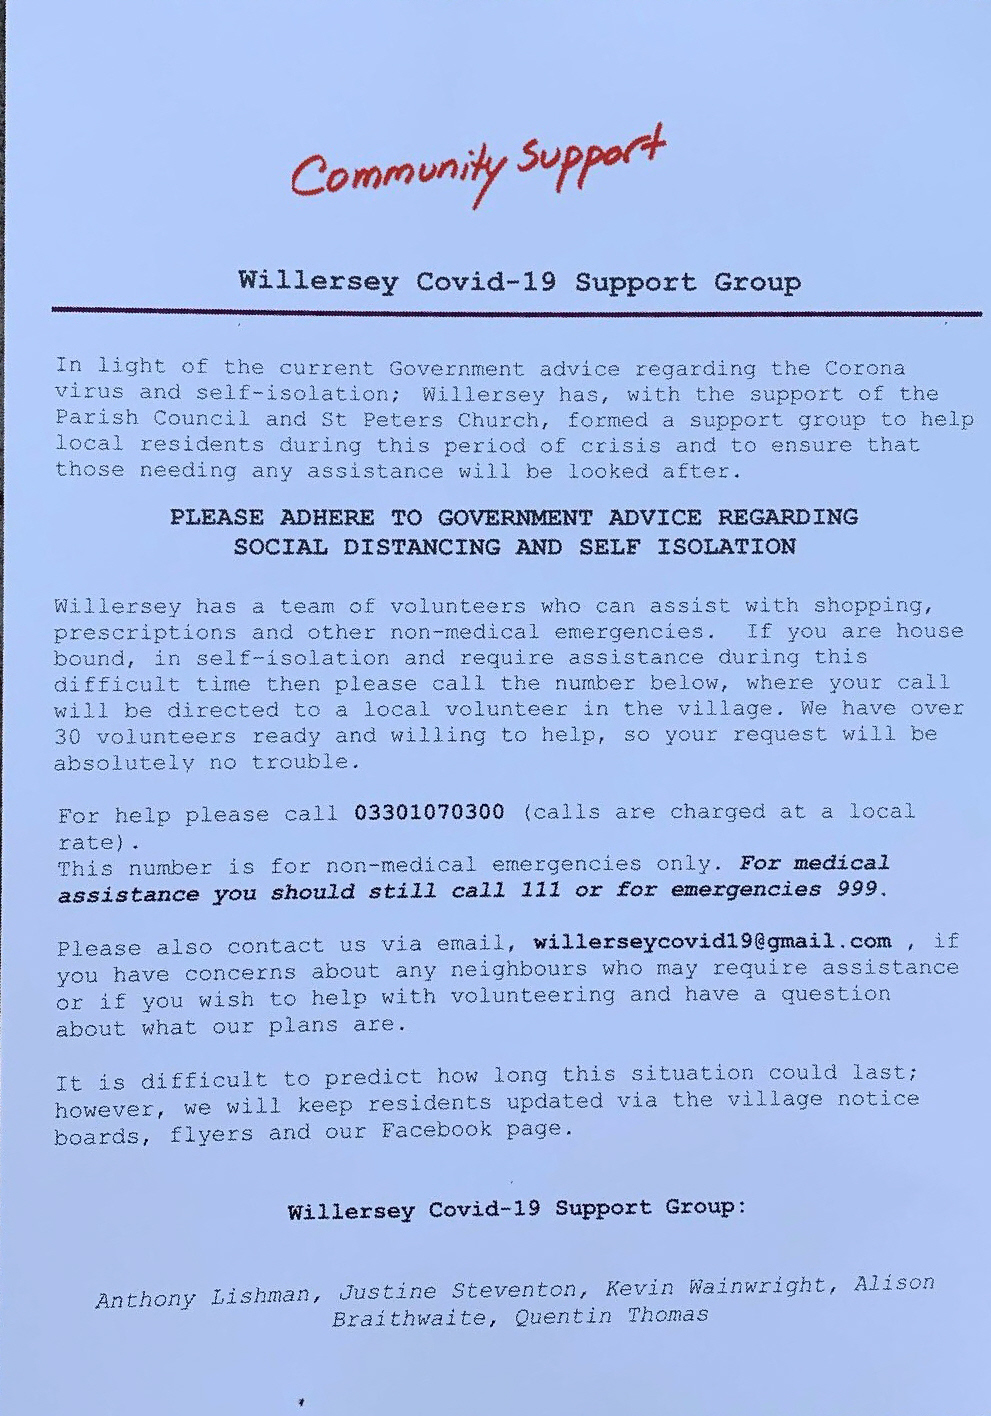 Willersey Covid-19 Support Group Flyer 1